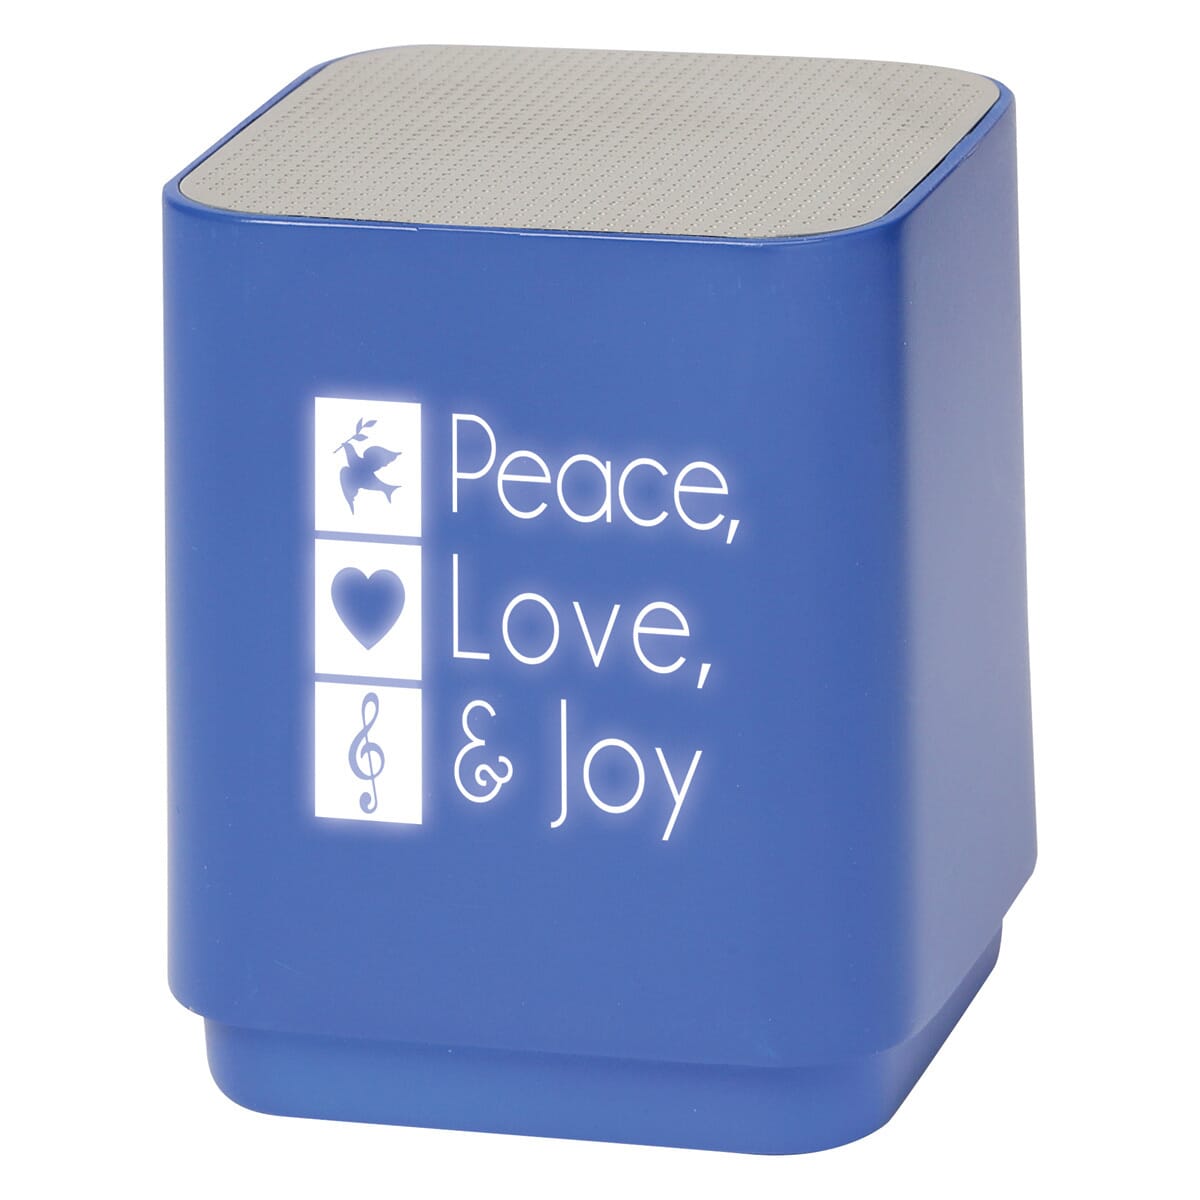 Bluetooth speaker with holiday imprint